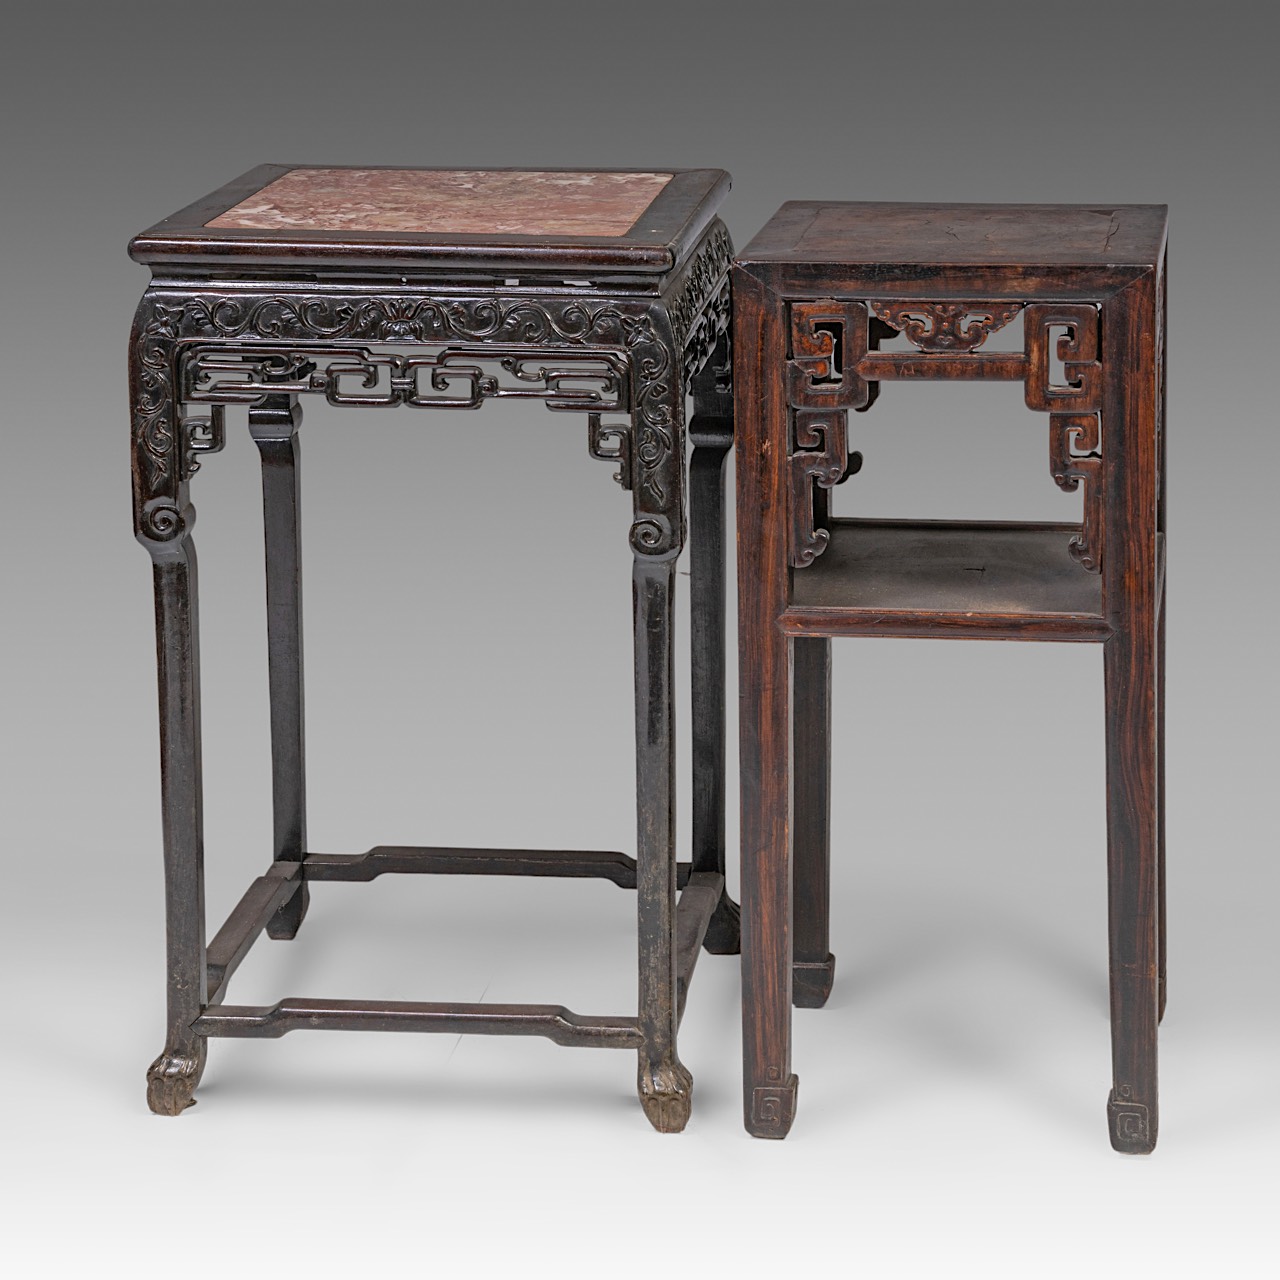 Two South-Chinese carved hardwood bases, one with a marble top, late Qing, largest H 82 - 48 x 48 cm - Image 4 of 7